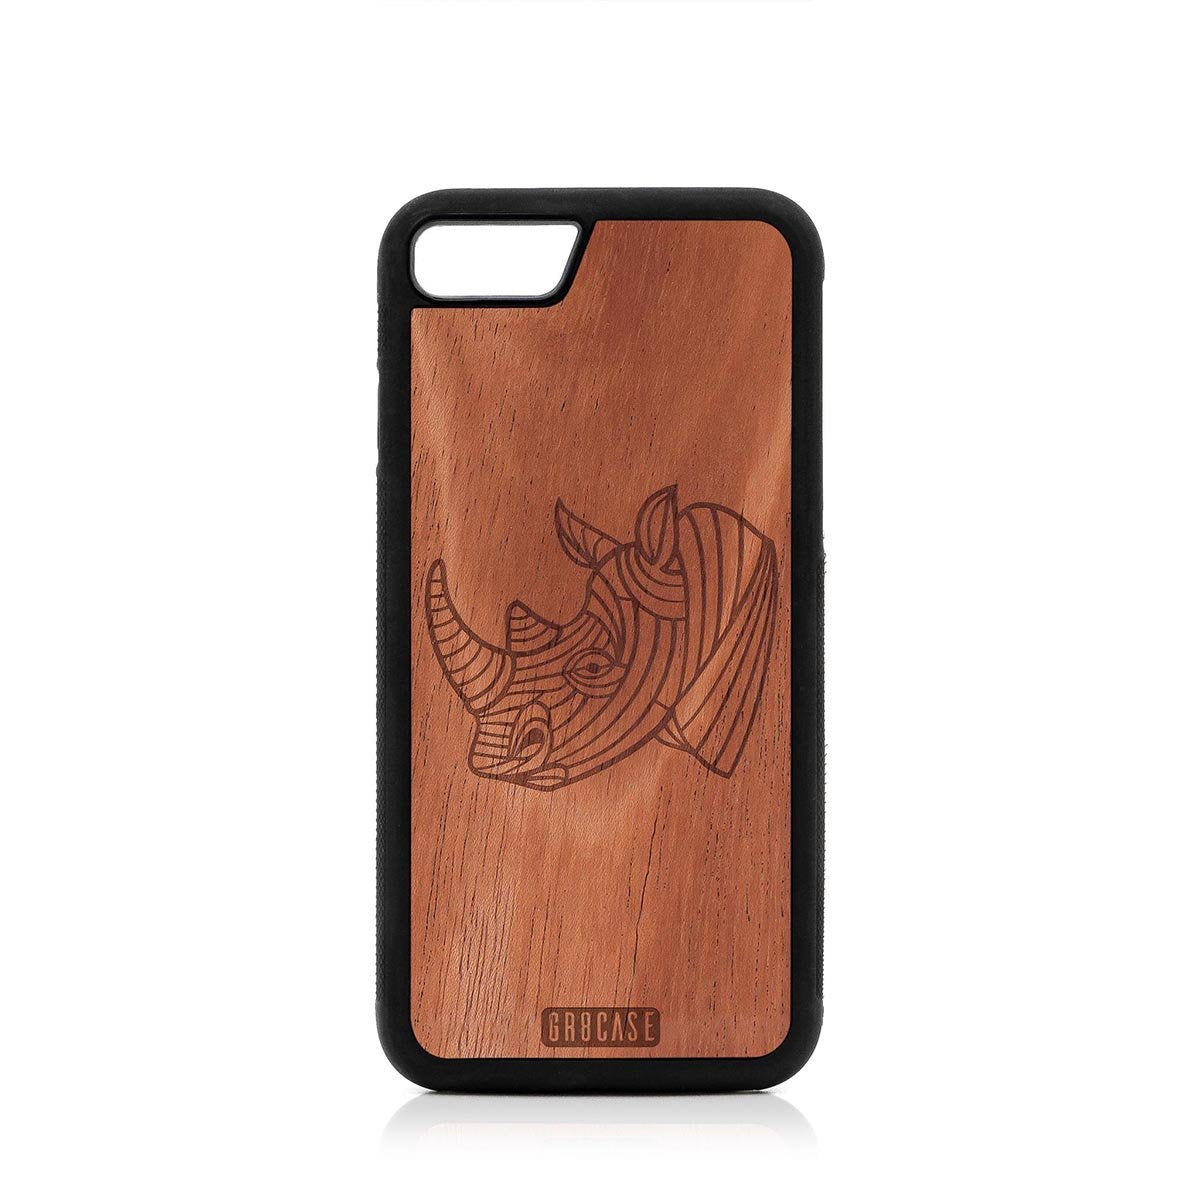 Rhino Design Wood Case For iPhone SE 2020 by GR8CASE